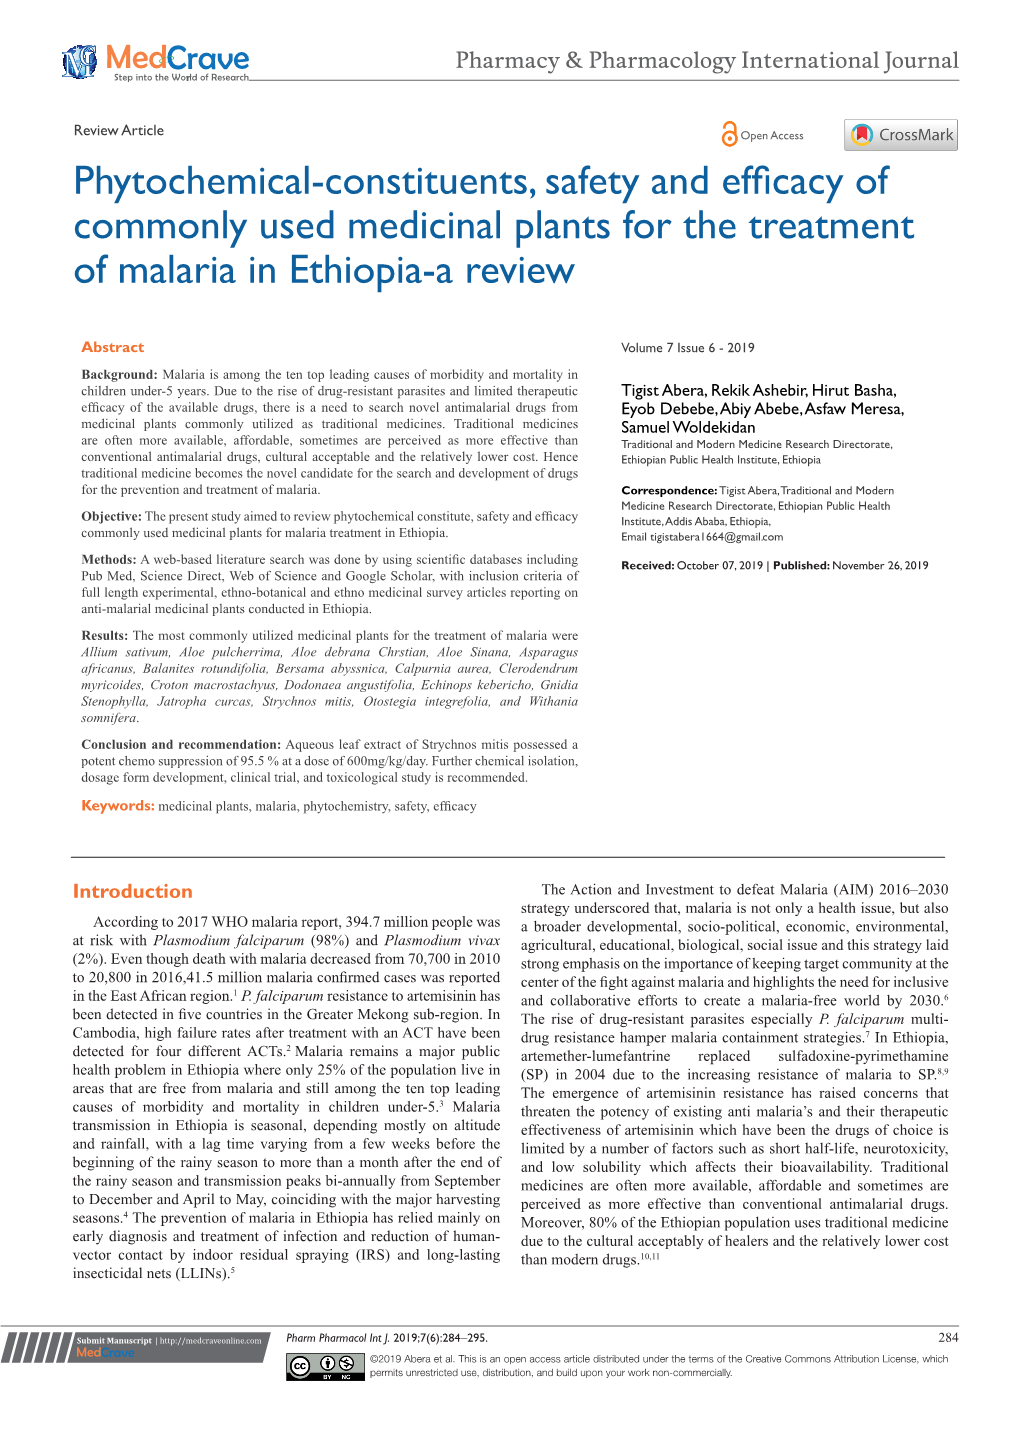 Phytochemical-Constituents, Safety and Efficacy of Commonly Used Medicinal Plants for the Treatment of Malaria in Ethiopia-A Review